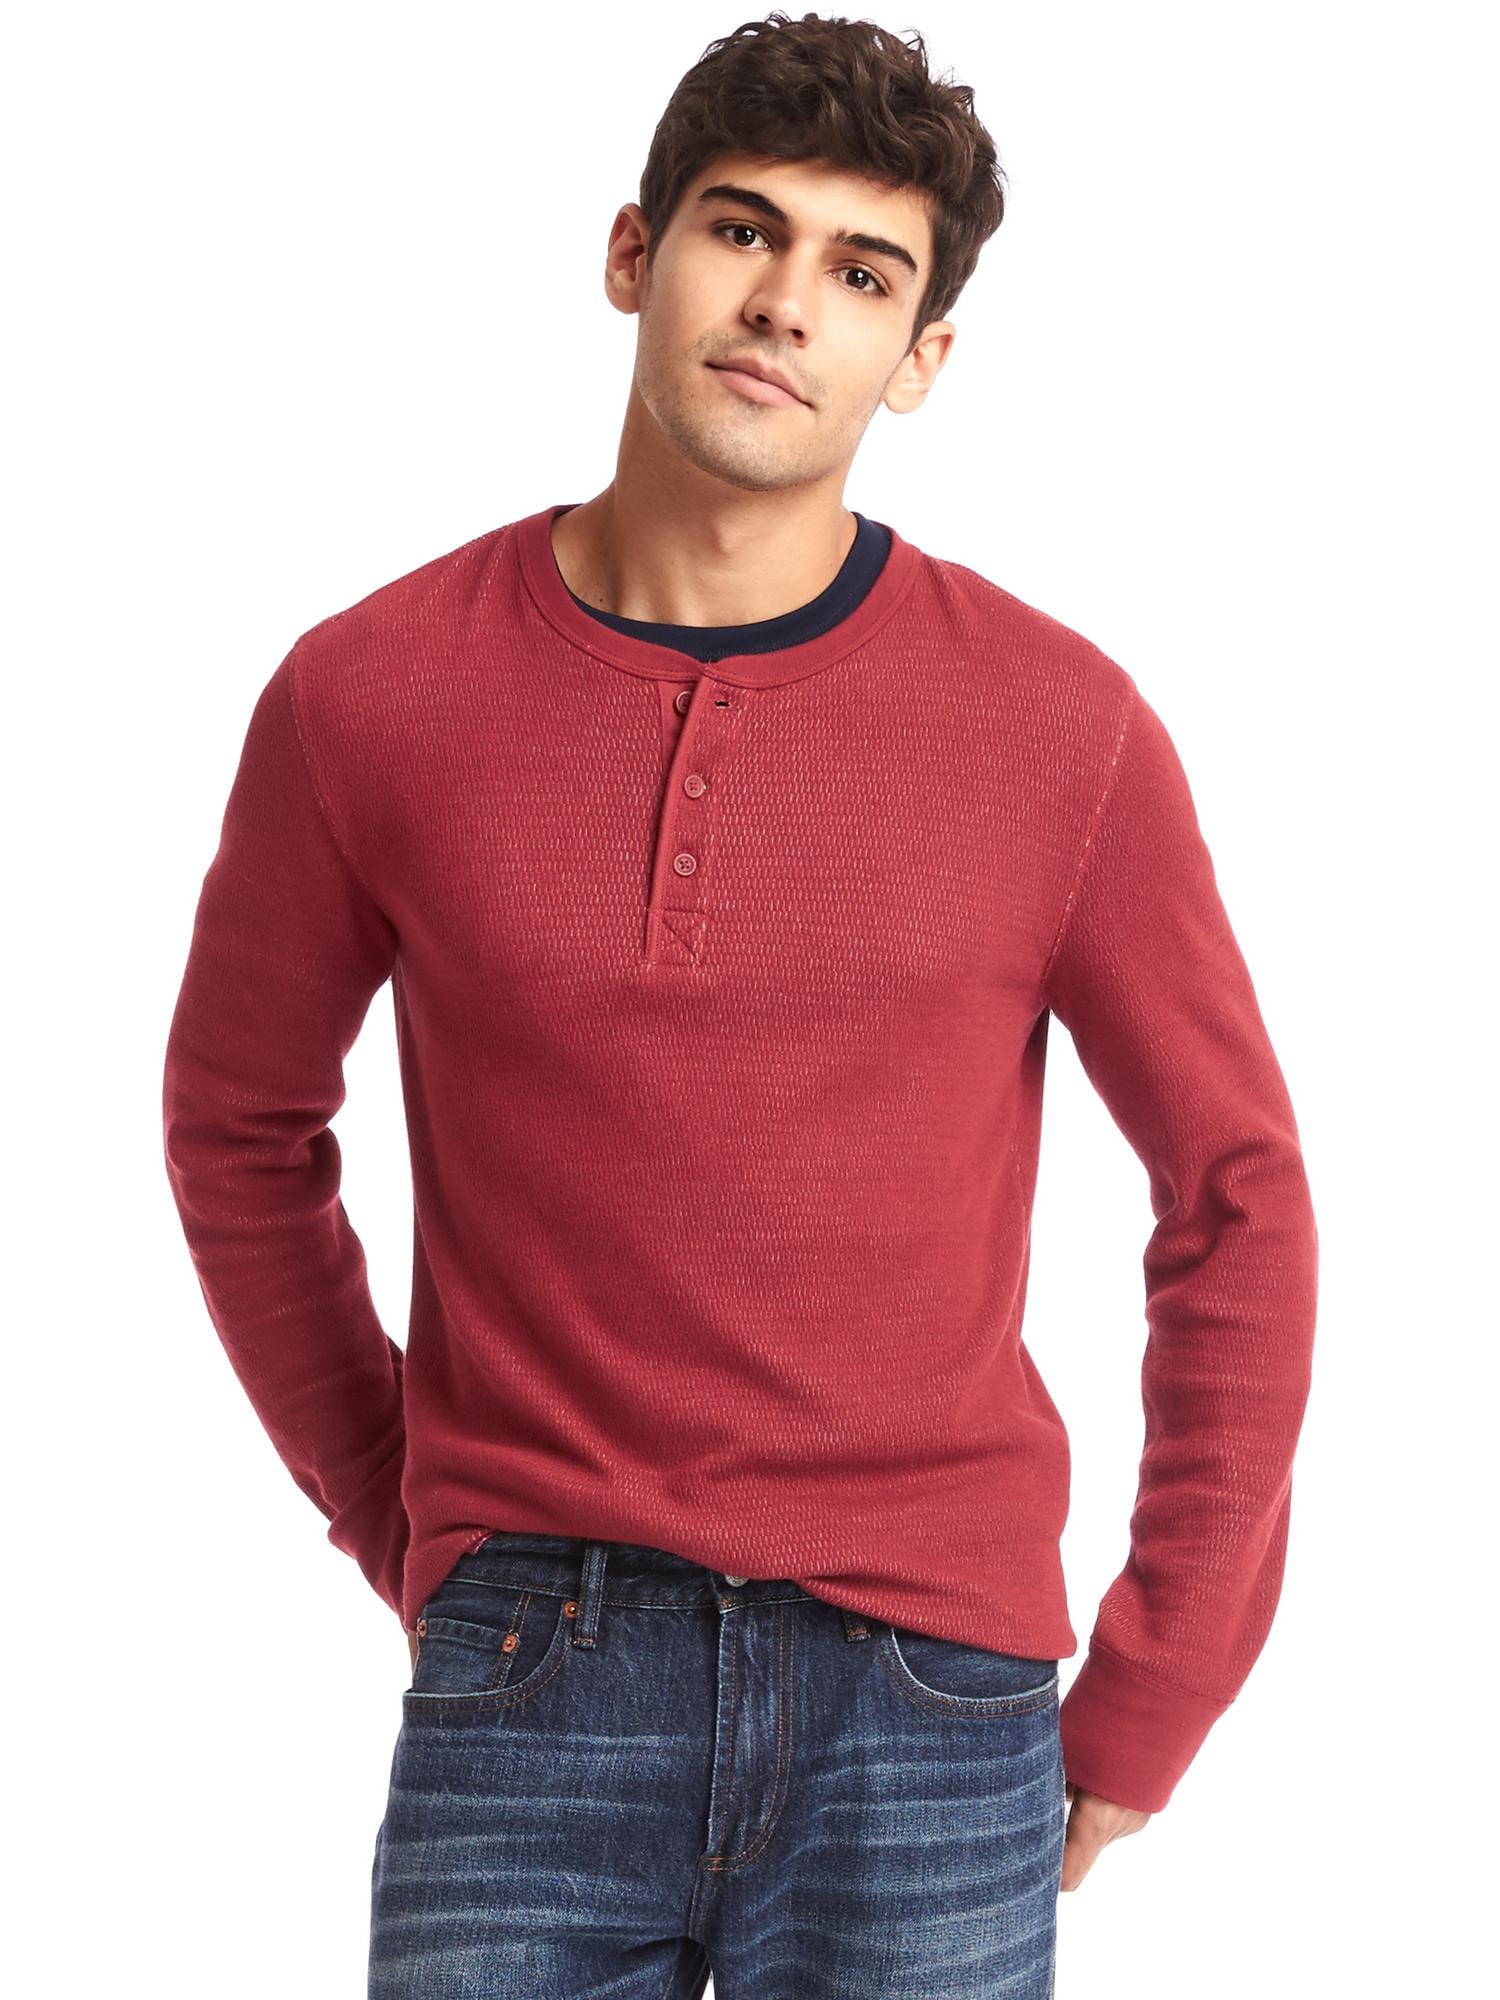 Men's Waffle-Knit Henley Athletic Top - All In Motion™ Red M